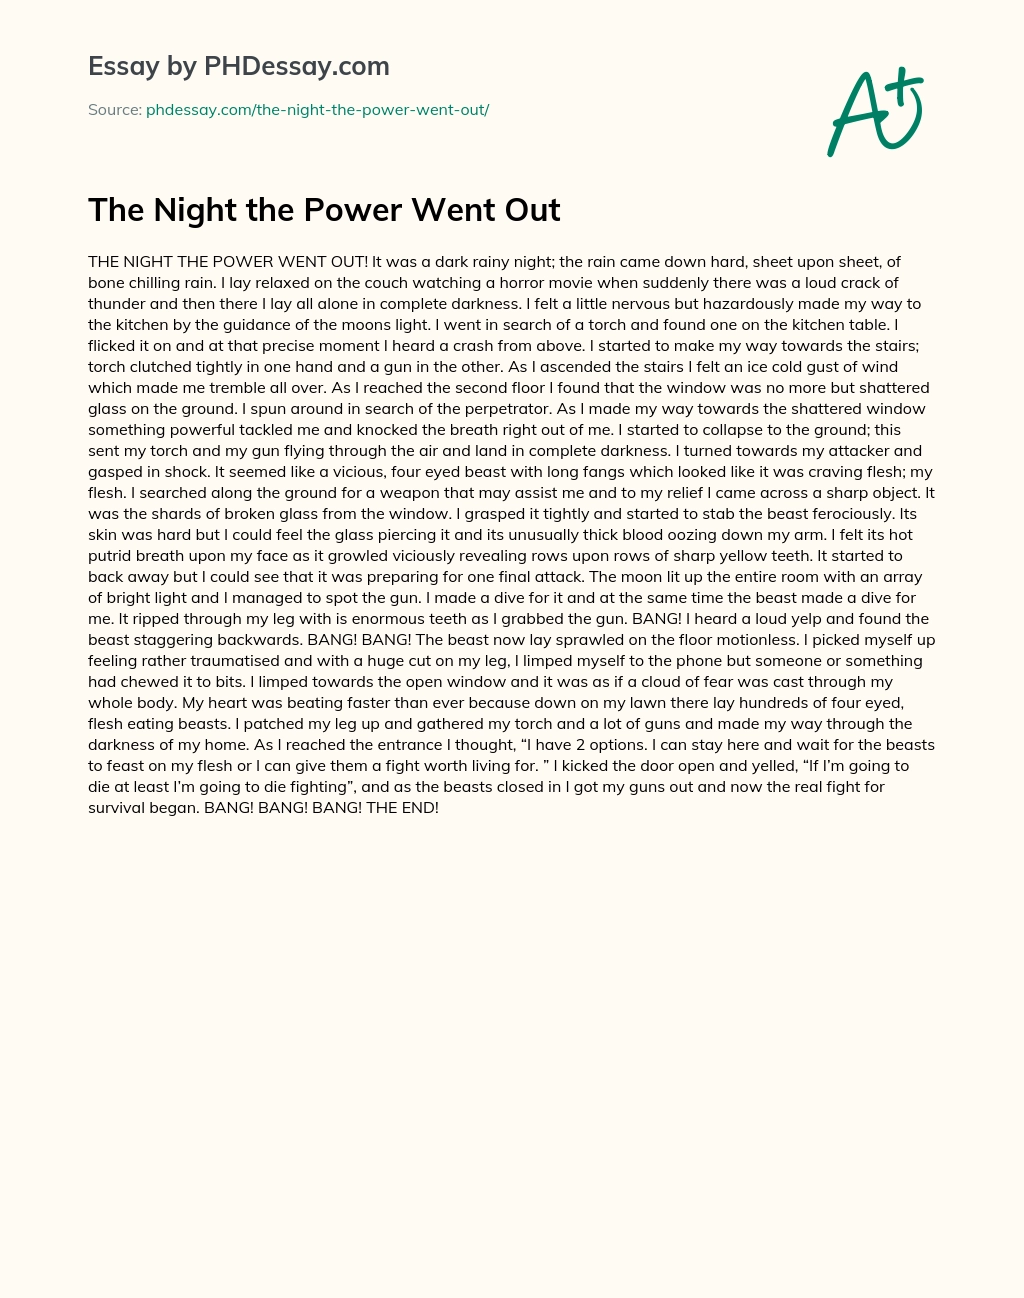 The Night the Power Went Out essay